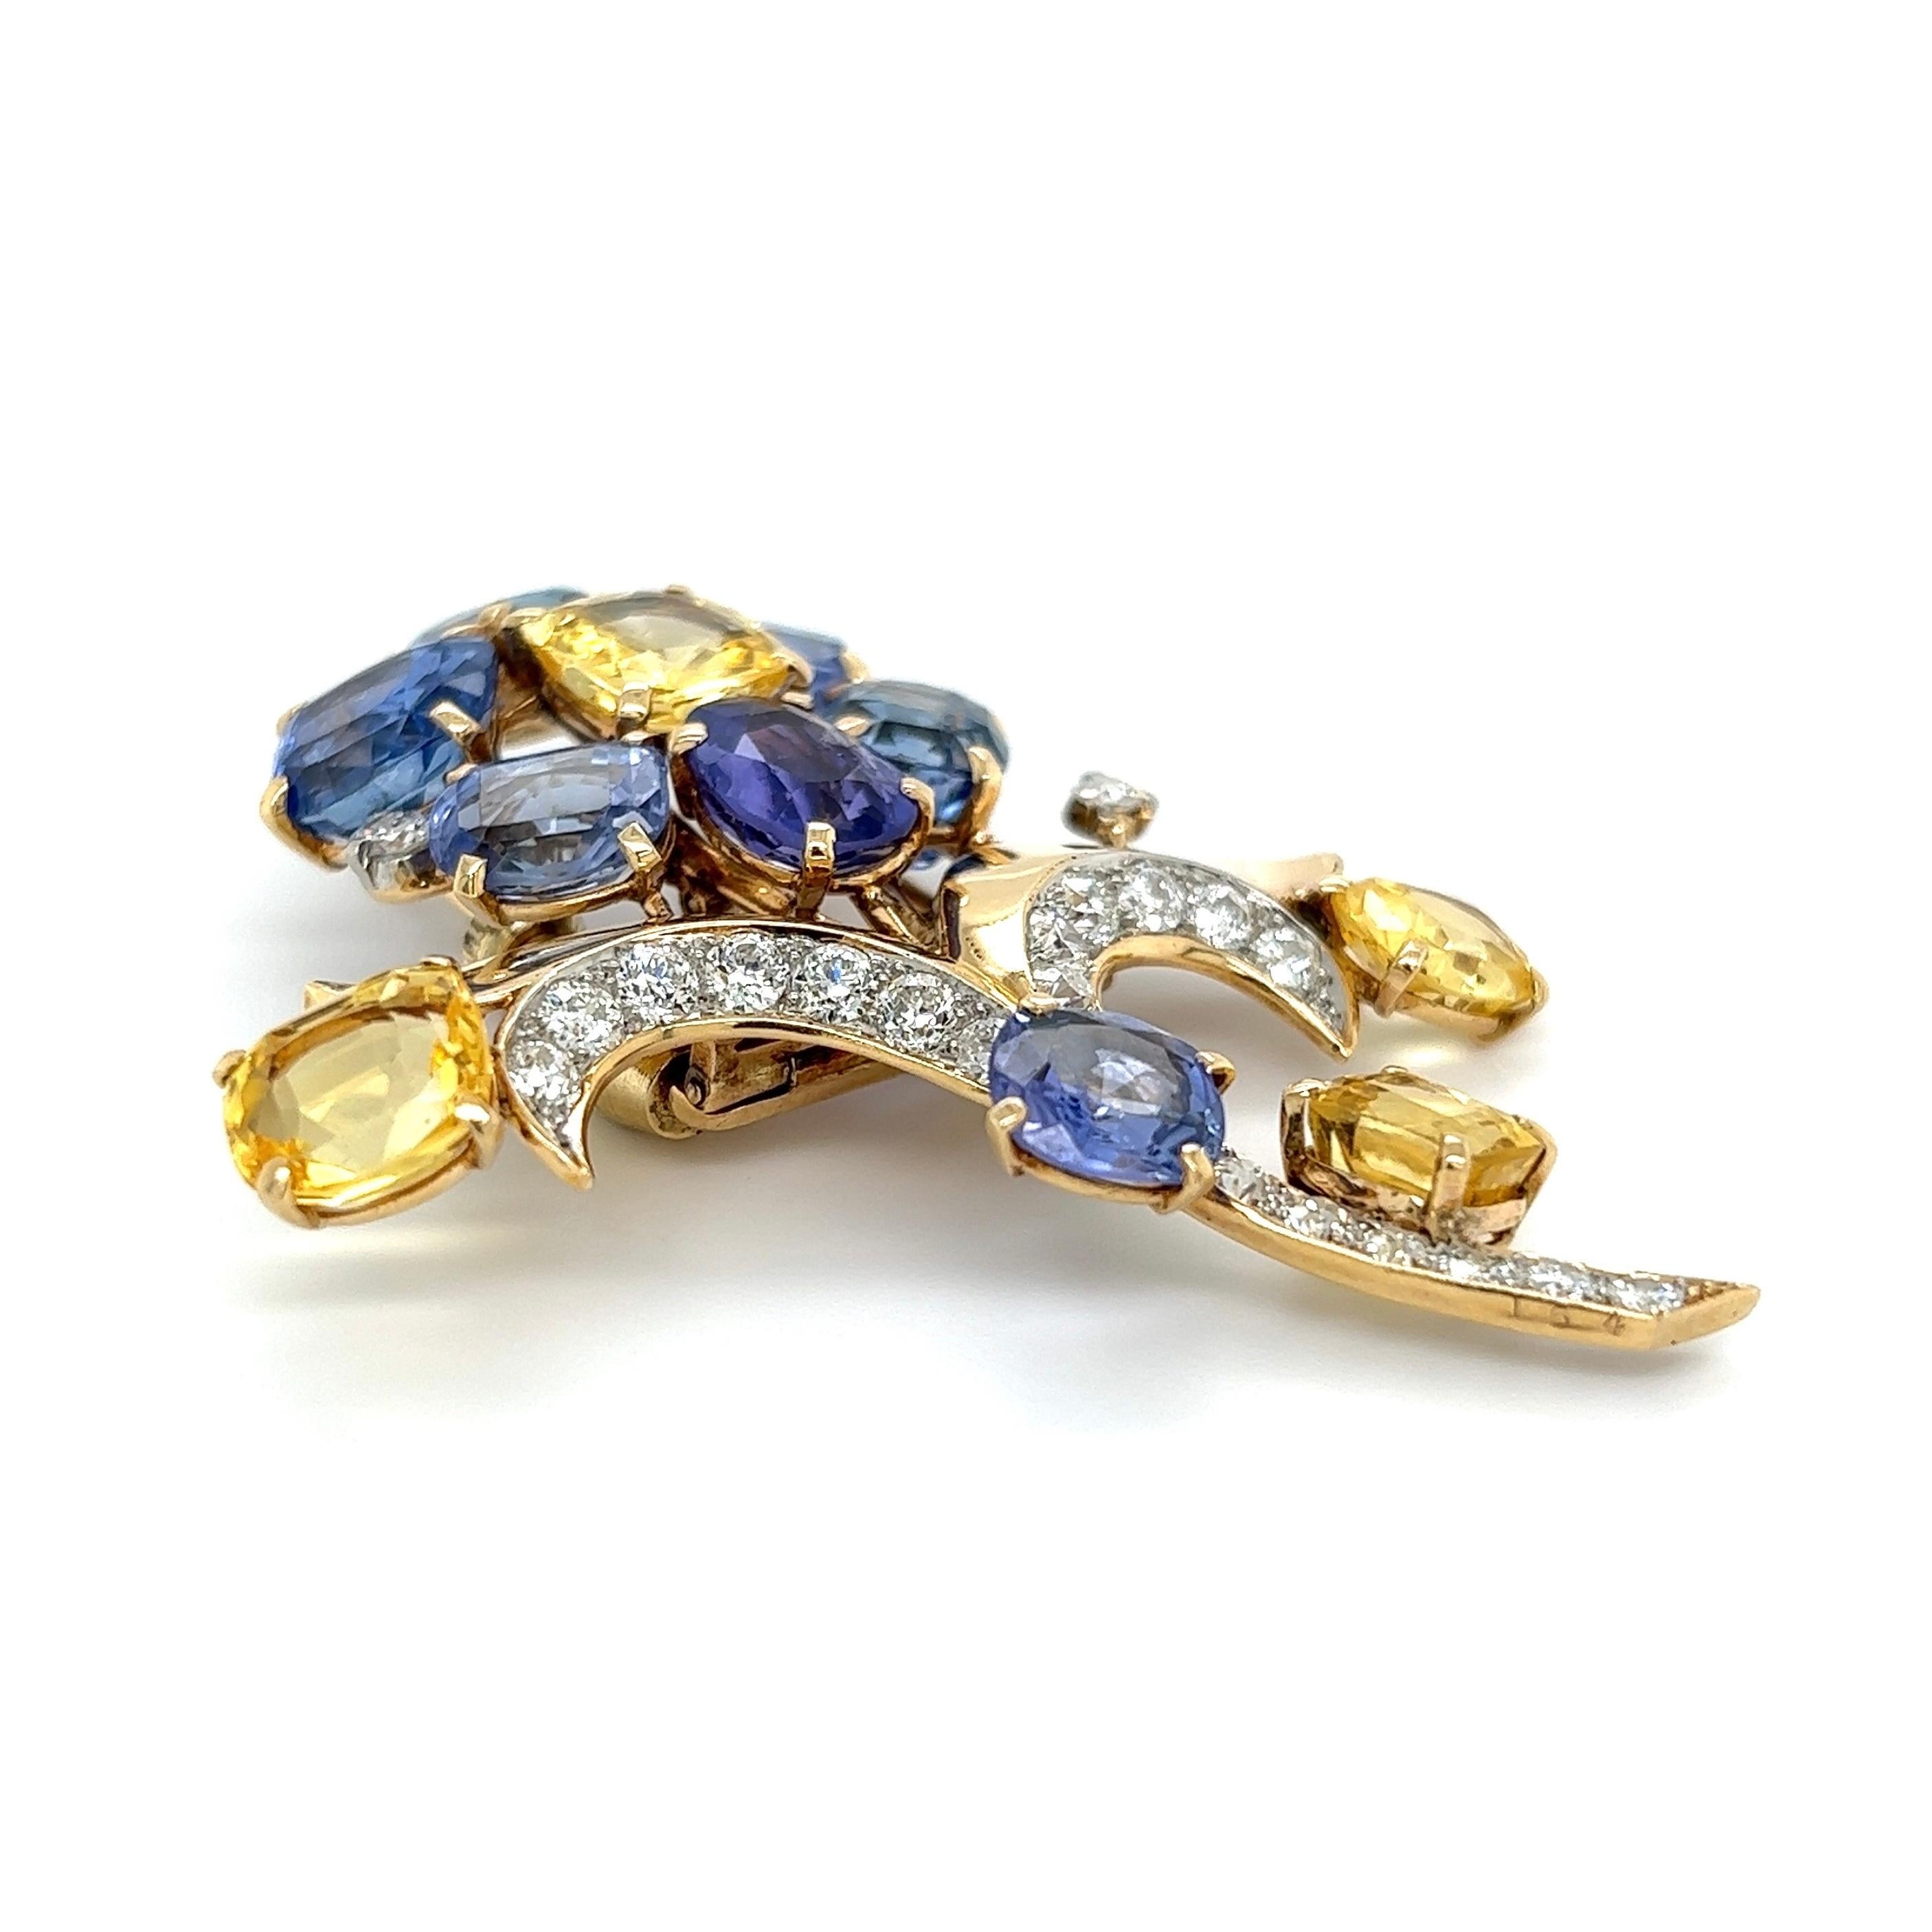 Mixed Cut Iconic Cartier Sapphire and Diamond Vintage Brooch Pin Estate Fine Jewelry For Sale